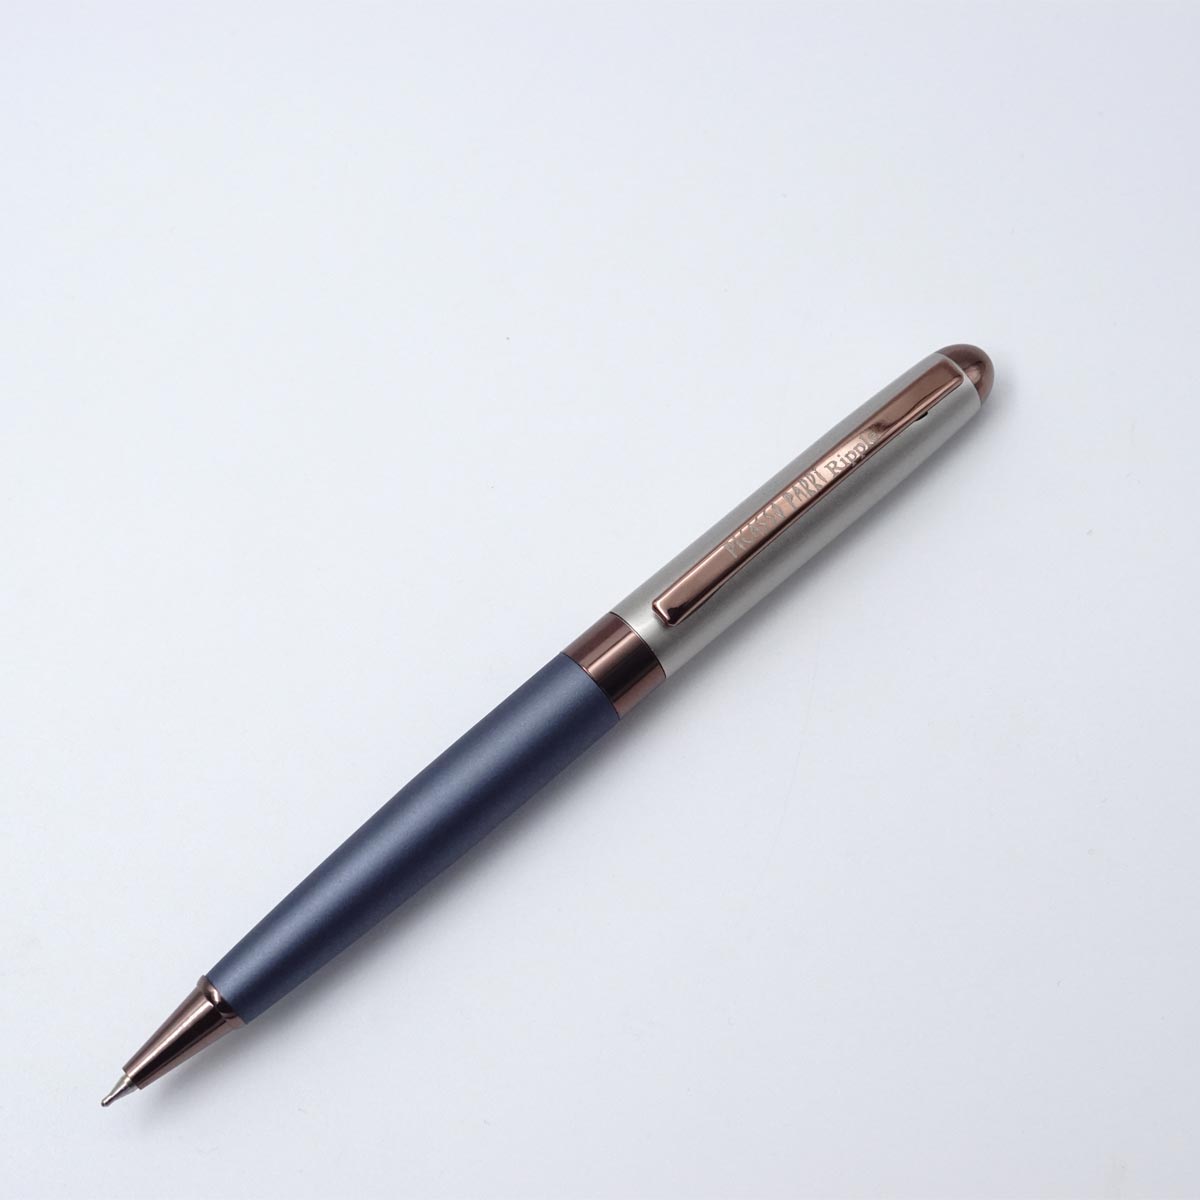 Picasso Parri Ripple Matt Blue And Butter Cream Color Body With Copper Clip And Trim Twist Type Ball Pen SKU 25157